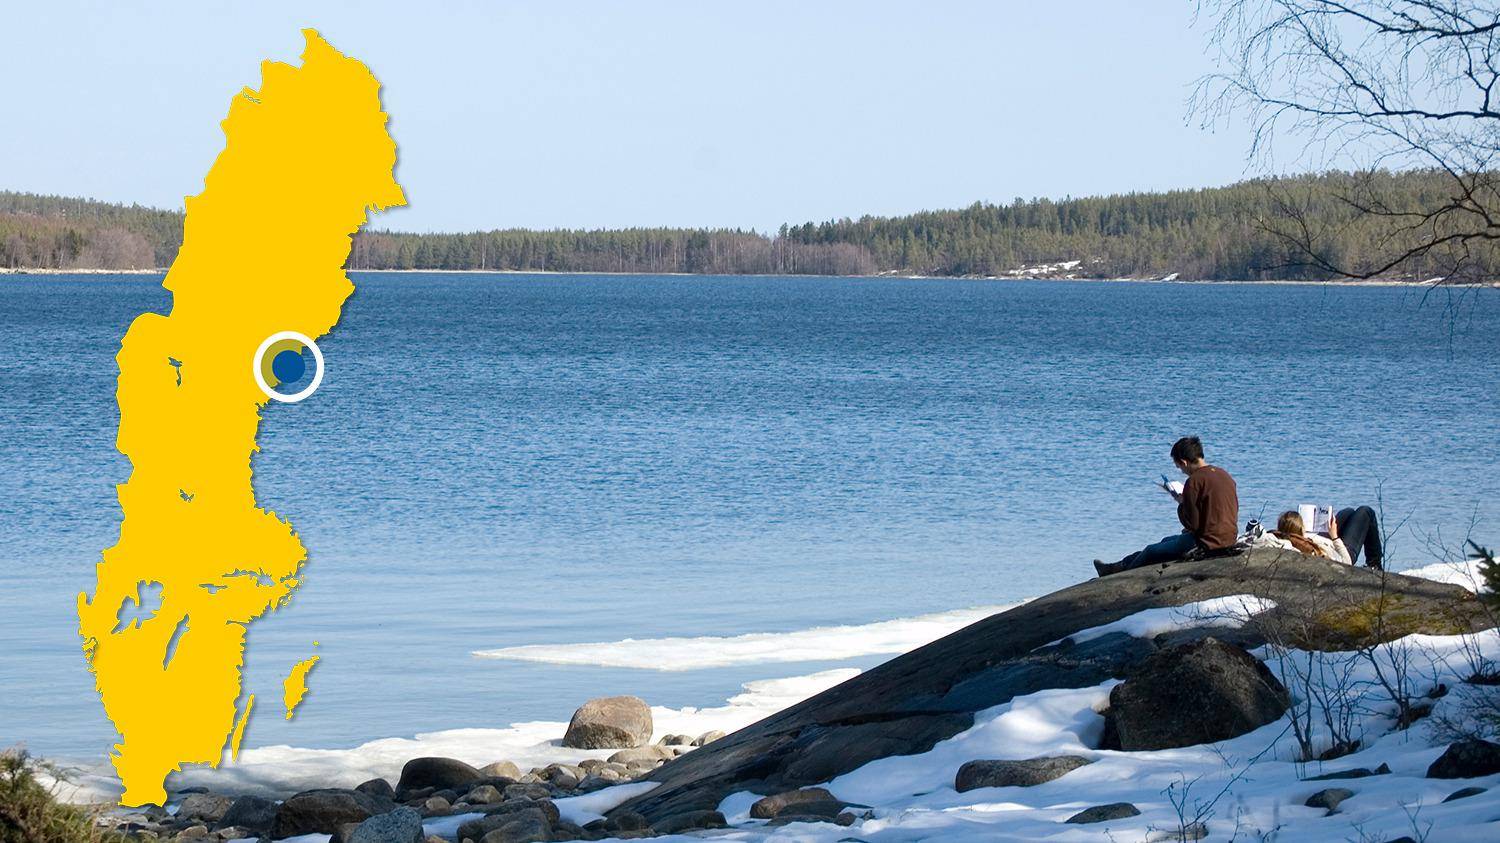 Two people sitting on a cliff near the water and reading books in the sun during the winter. There is a yellow map of Sweden with a blue dot that marks the location of Bodviken.